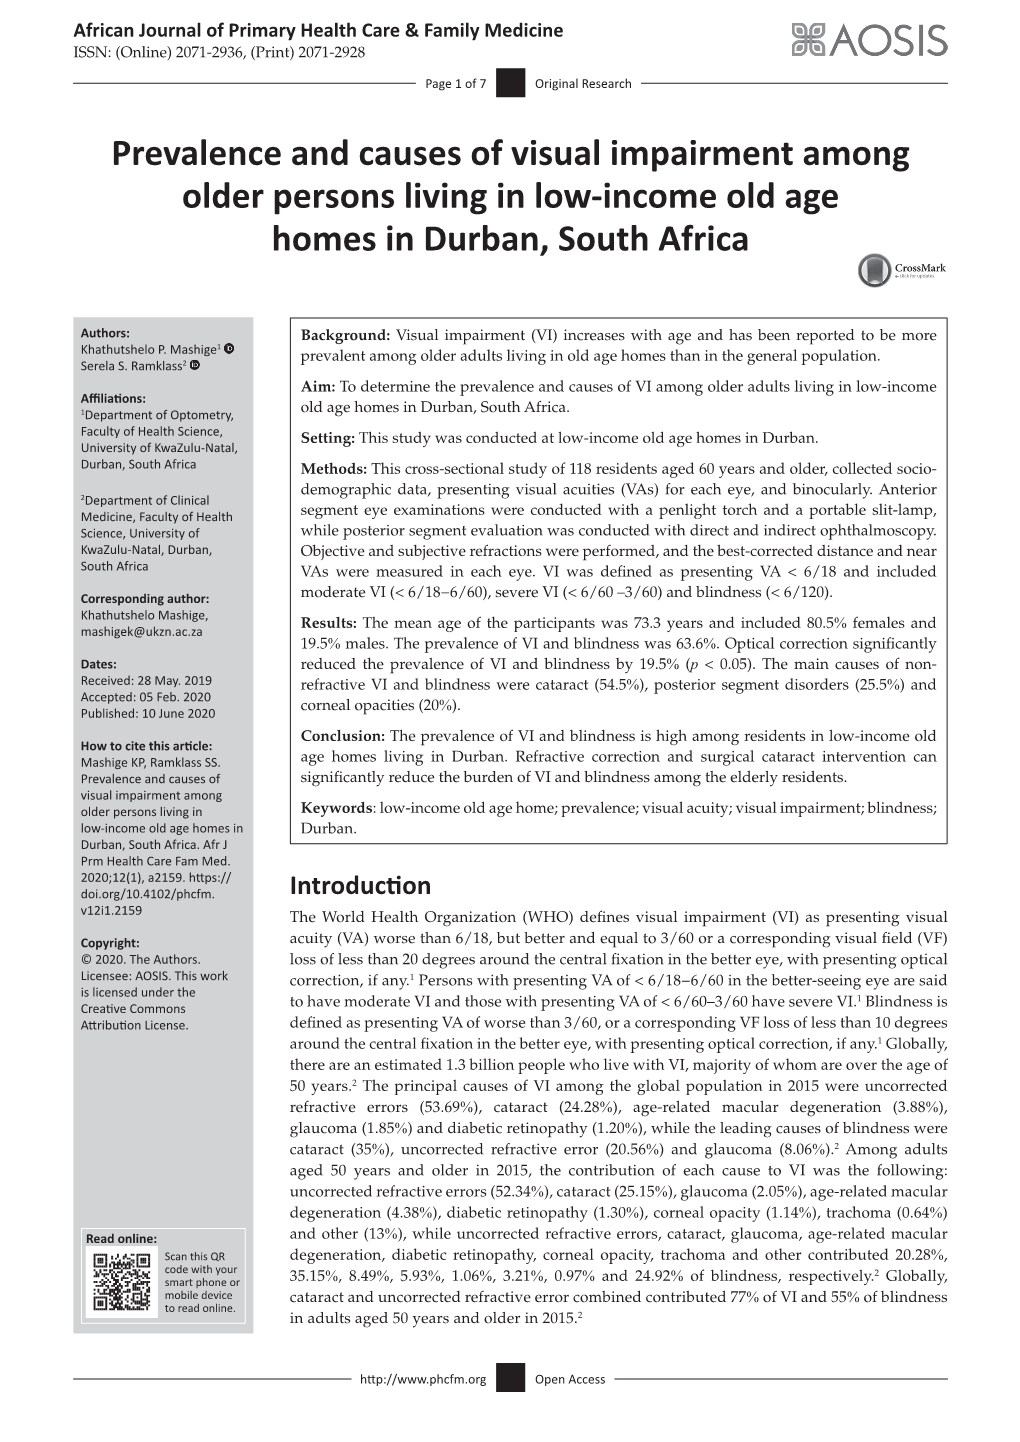 Prevalence and Causes of Visual Impairment Among Older Persons Living in Low-Income Old Age Homes in Durban, South Africa